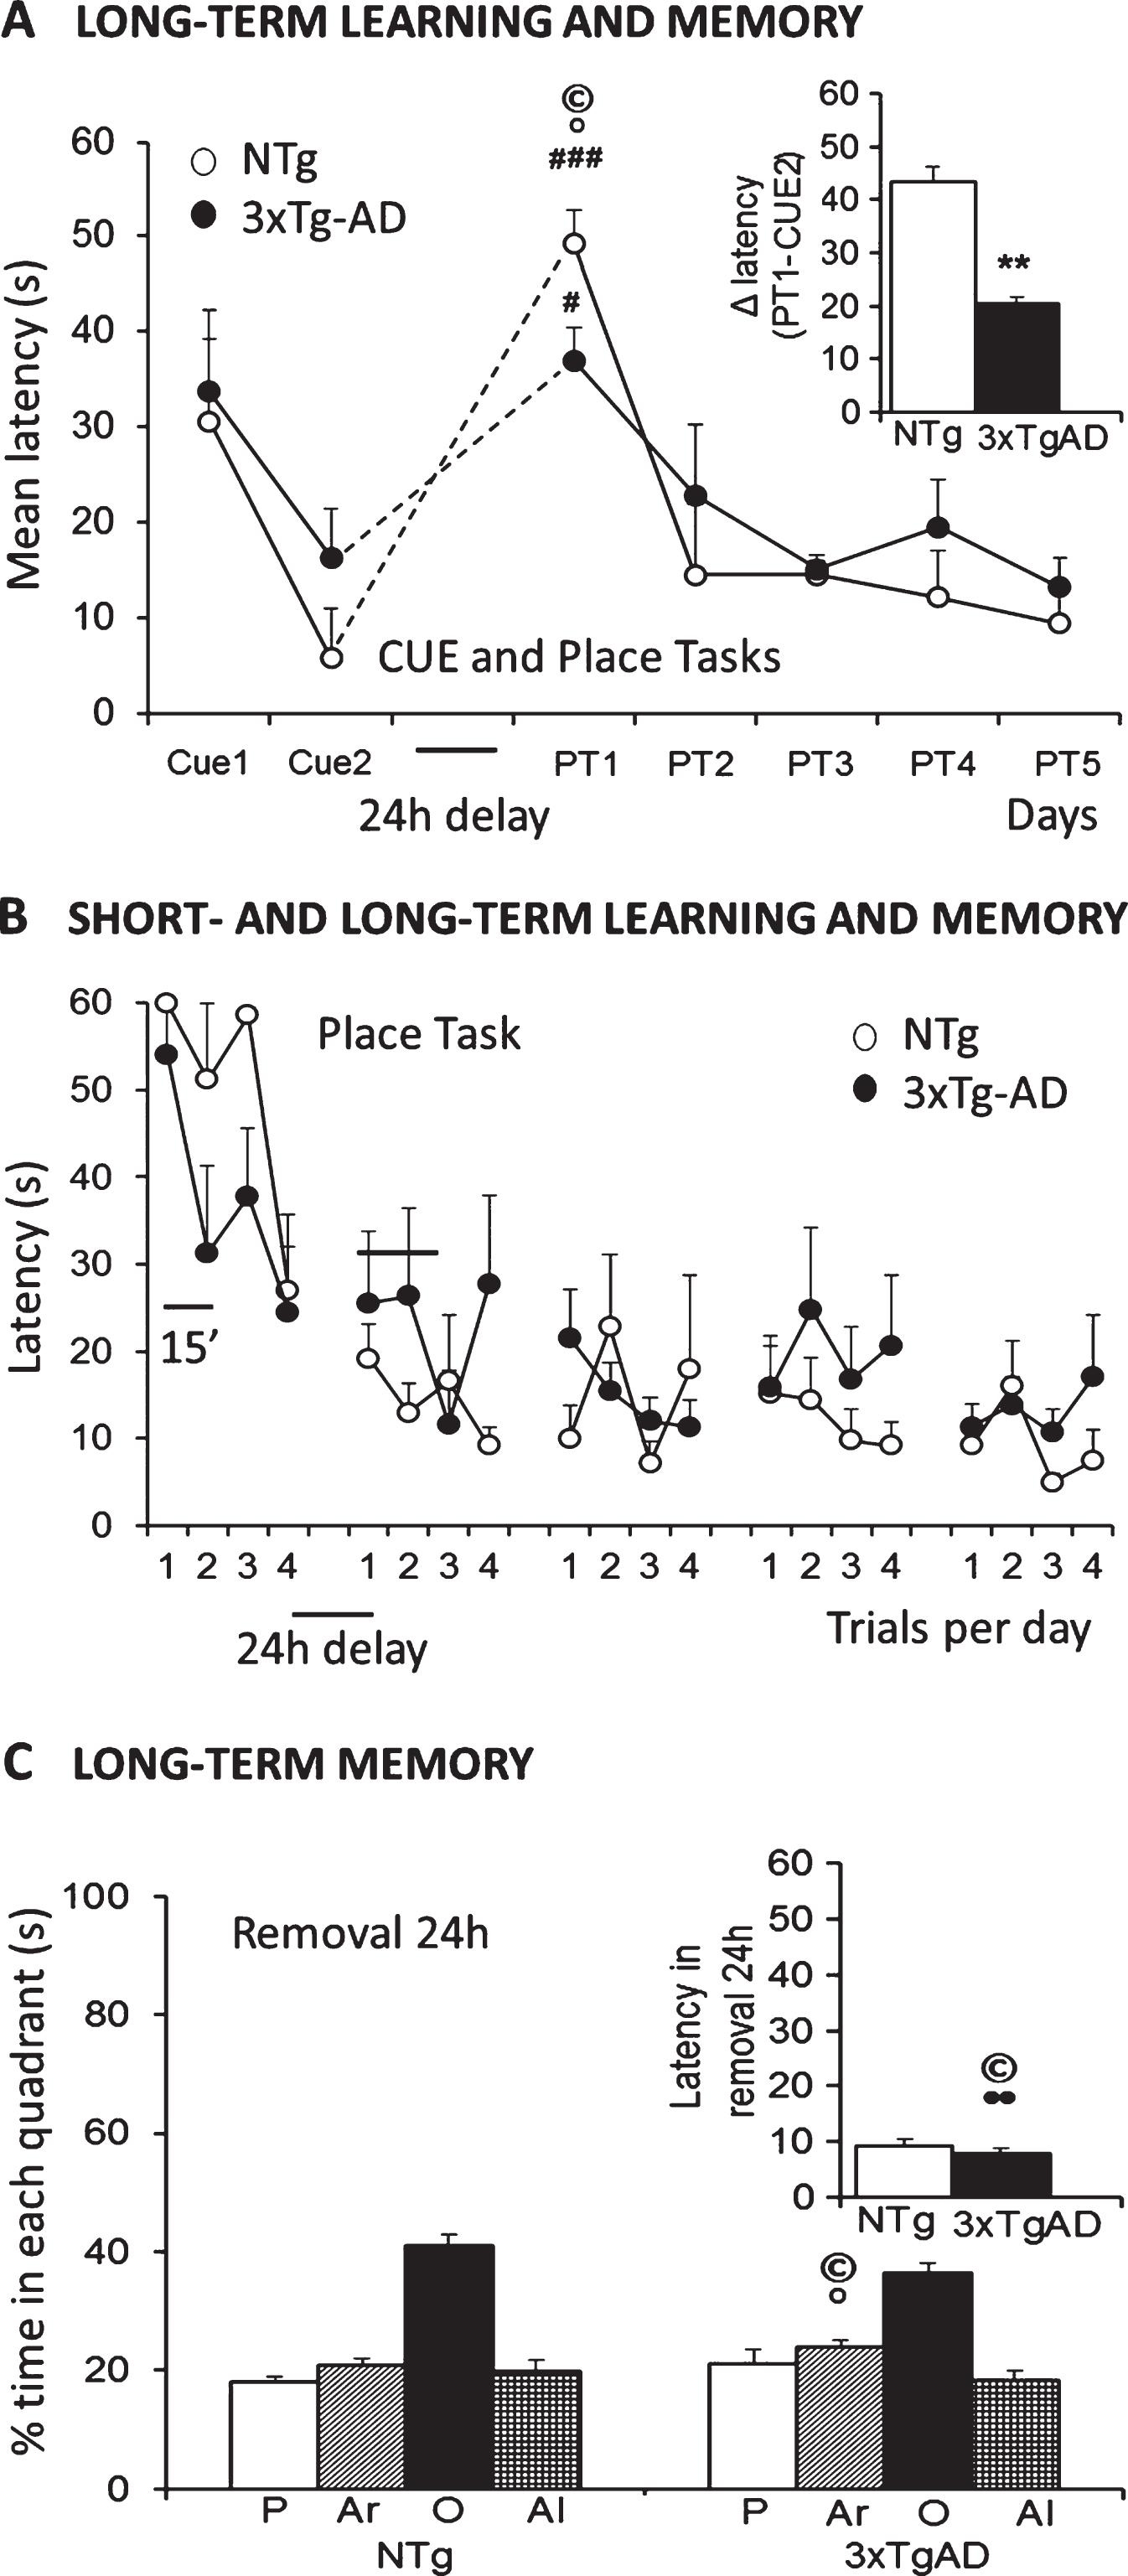 Salient learning and memory deficits in three paradigms of the Morris water maze in 18-month-old female 3xTg-AD mice surviving to advanced stages of disease as compared to age-matched NTg counterparts. A) The cue and place tasks showed similar acquisition curves over days, but genotype differences could be found when the platform was hidden and located in a reversed position. The new task was more difficult for animals remembering the prior location, so it took them more time to find the new position. B) Detailed analysis of short- and long-term memory assessed in the place tasks evidenced that cognitive impairment was the salient trait for distinguishing the genotypes. C) Memory, assessed in the Removal, showed lack of preference for the trained quadrant in both groups pf mice, with a slightly worse performance in the 3xTg-AD mice. Student’s t-test, *p < 0.05, **p < 0.01 versus NTg mice. Paired t-test # p < 0.05, # # # p < 0.001 PT1 versus Cue2. (©) Pearson’s correlations between behavioral variables and lifespan: •positive, °negative, p < 0.01.